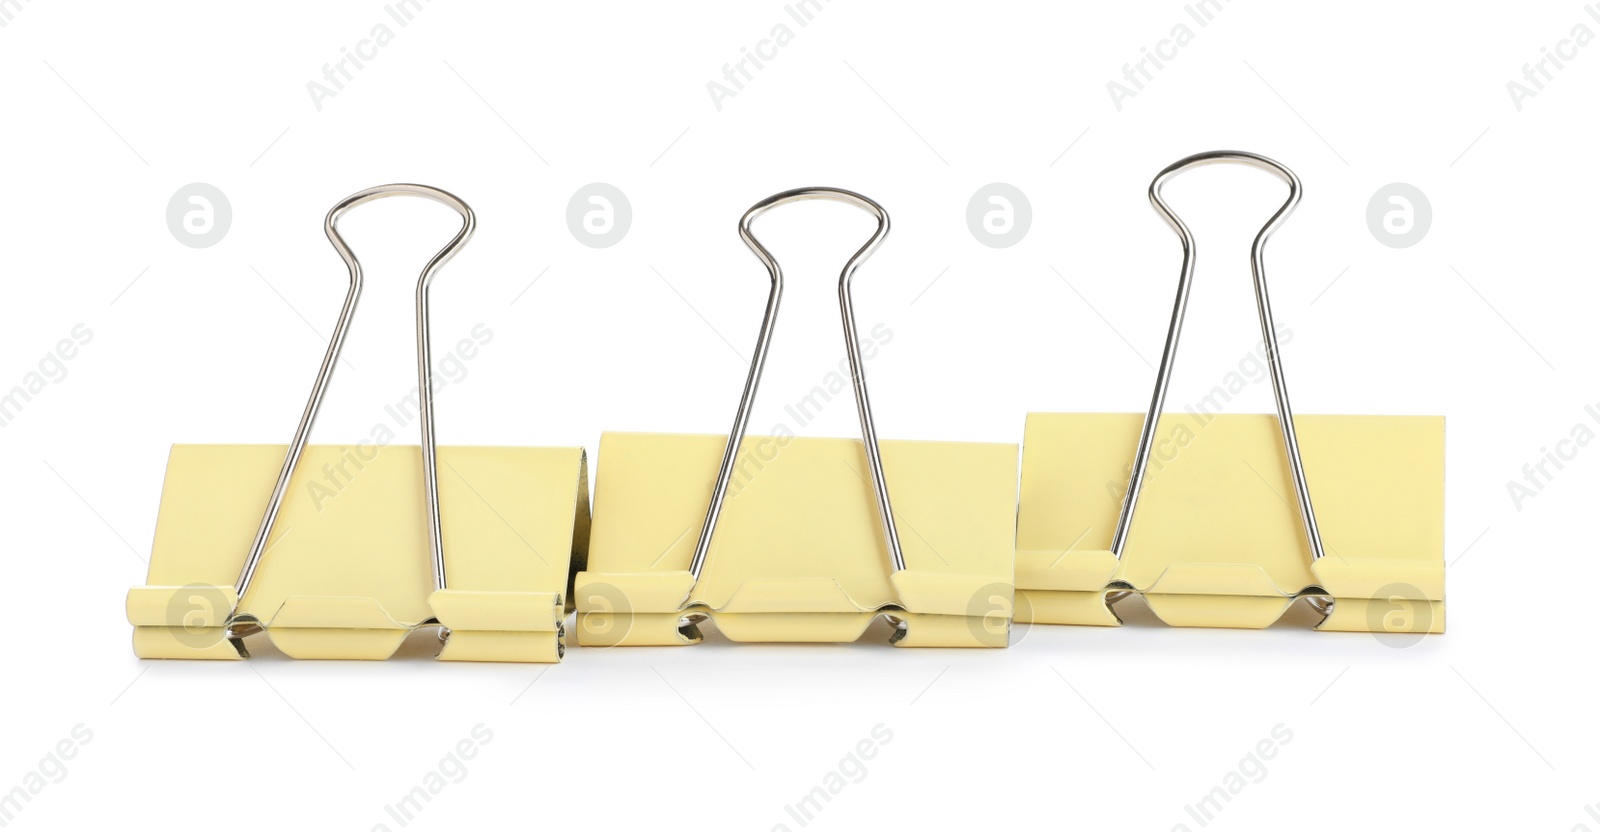 Photo of Yellow binder clips on white background. Stationery item